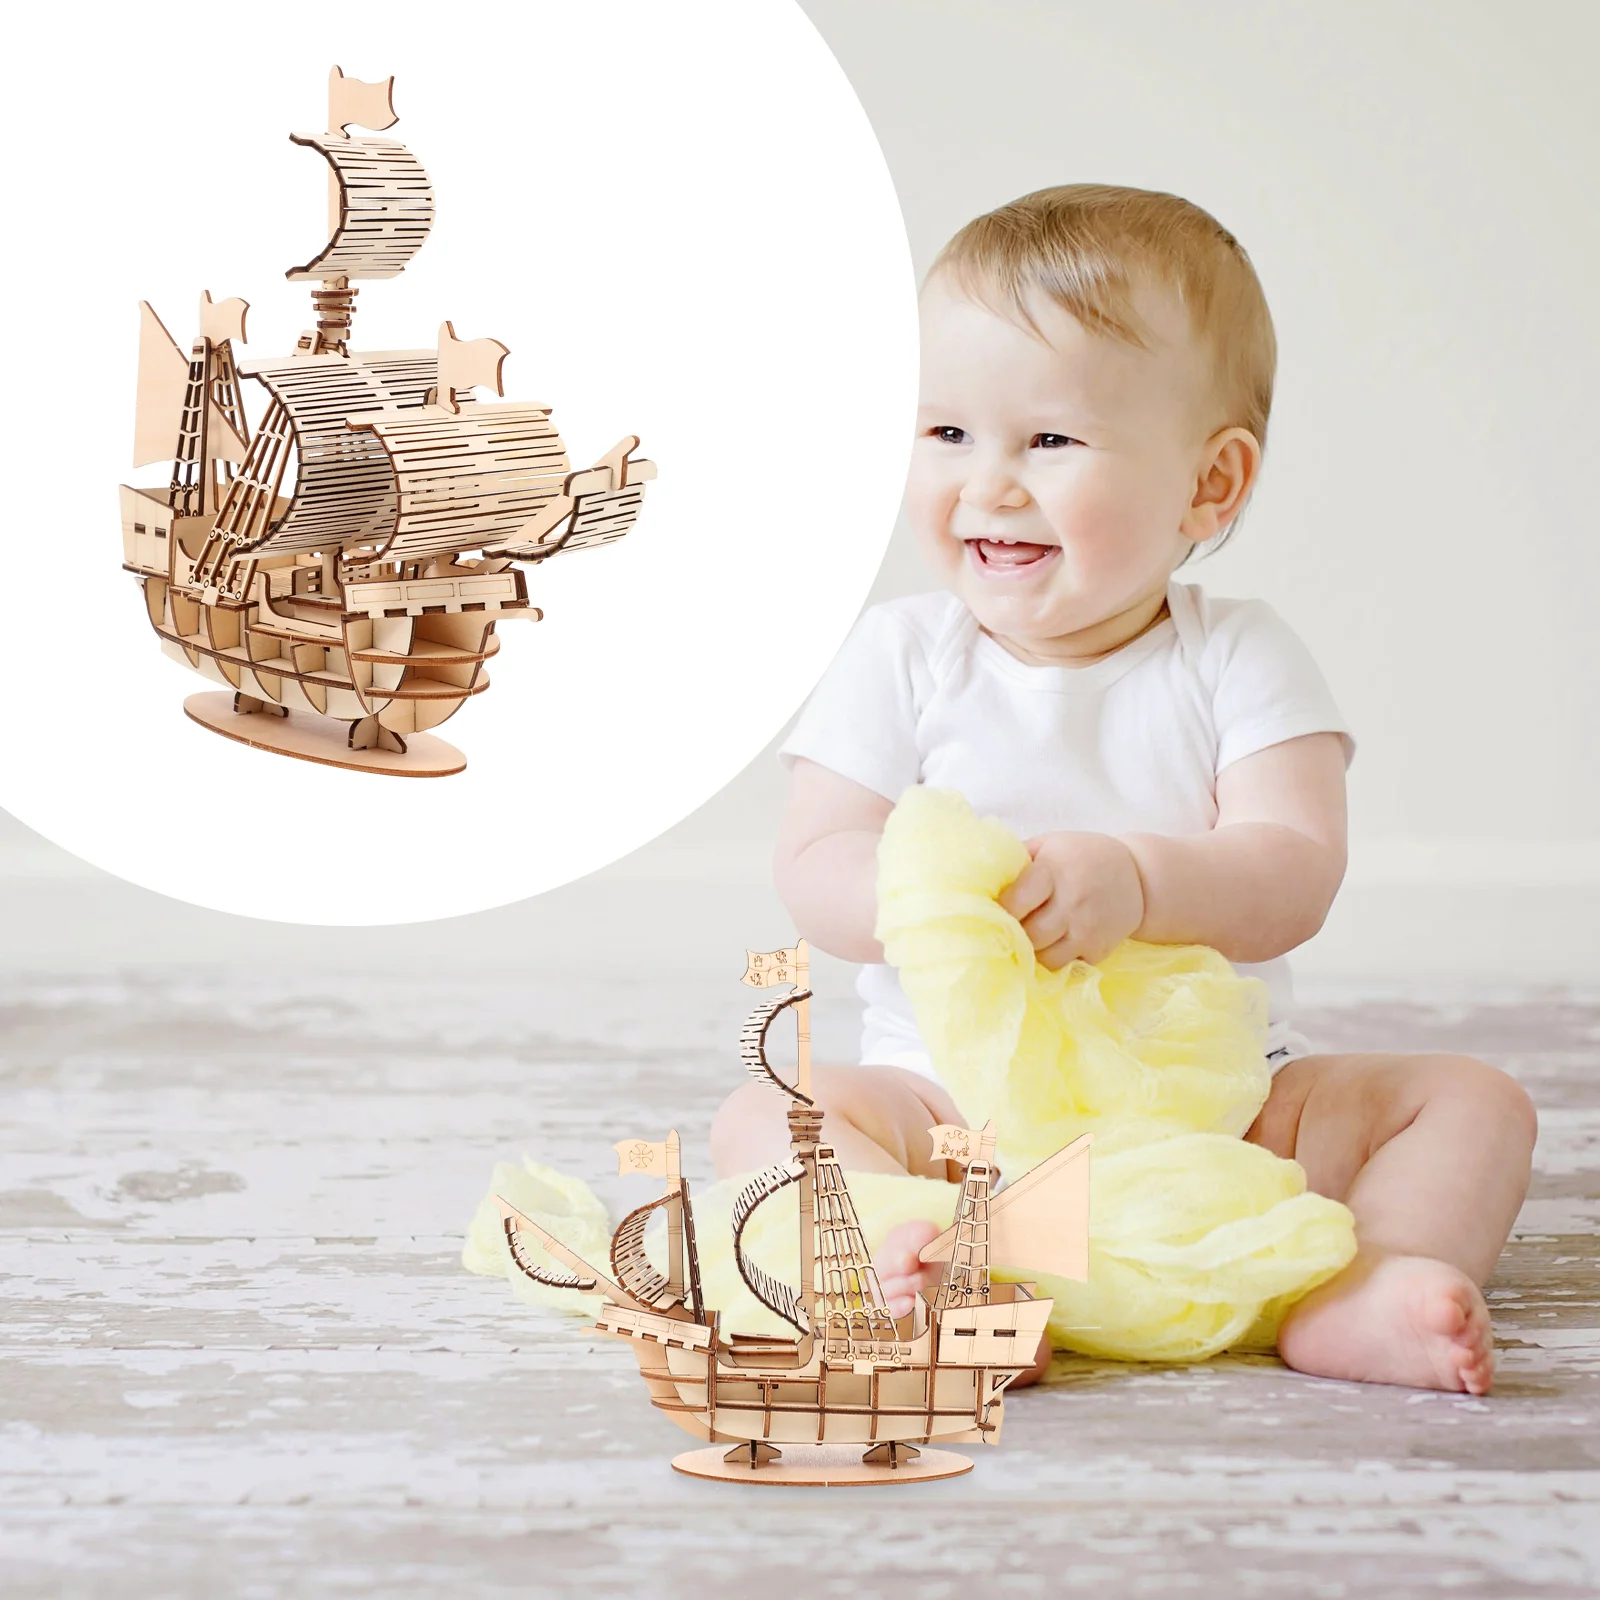 

Diorama Wooden Puzzle for Adults DIY Toy 3D Sailing Ship Suite Model Parent-child Puzzles Sailboat Assembled Craft